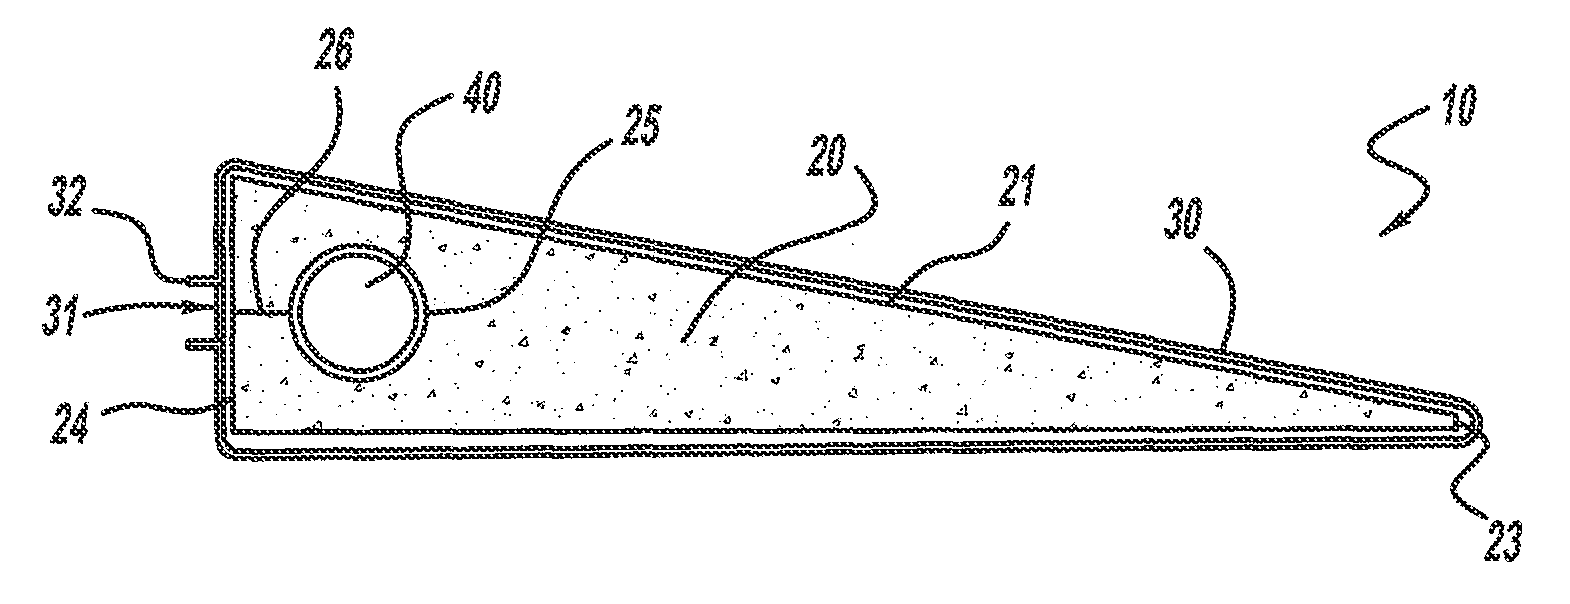 Infant Soothing Support Device